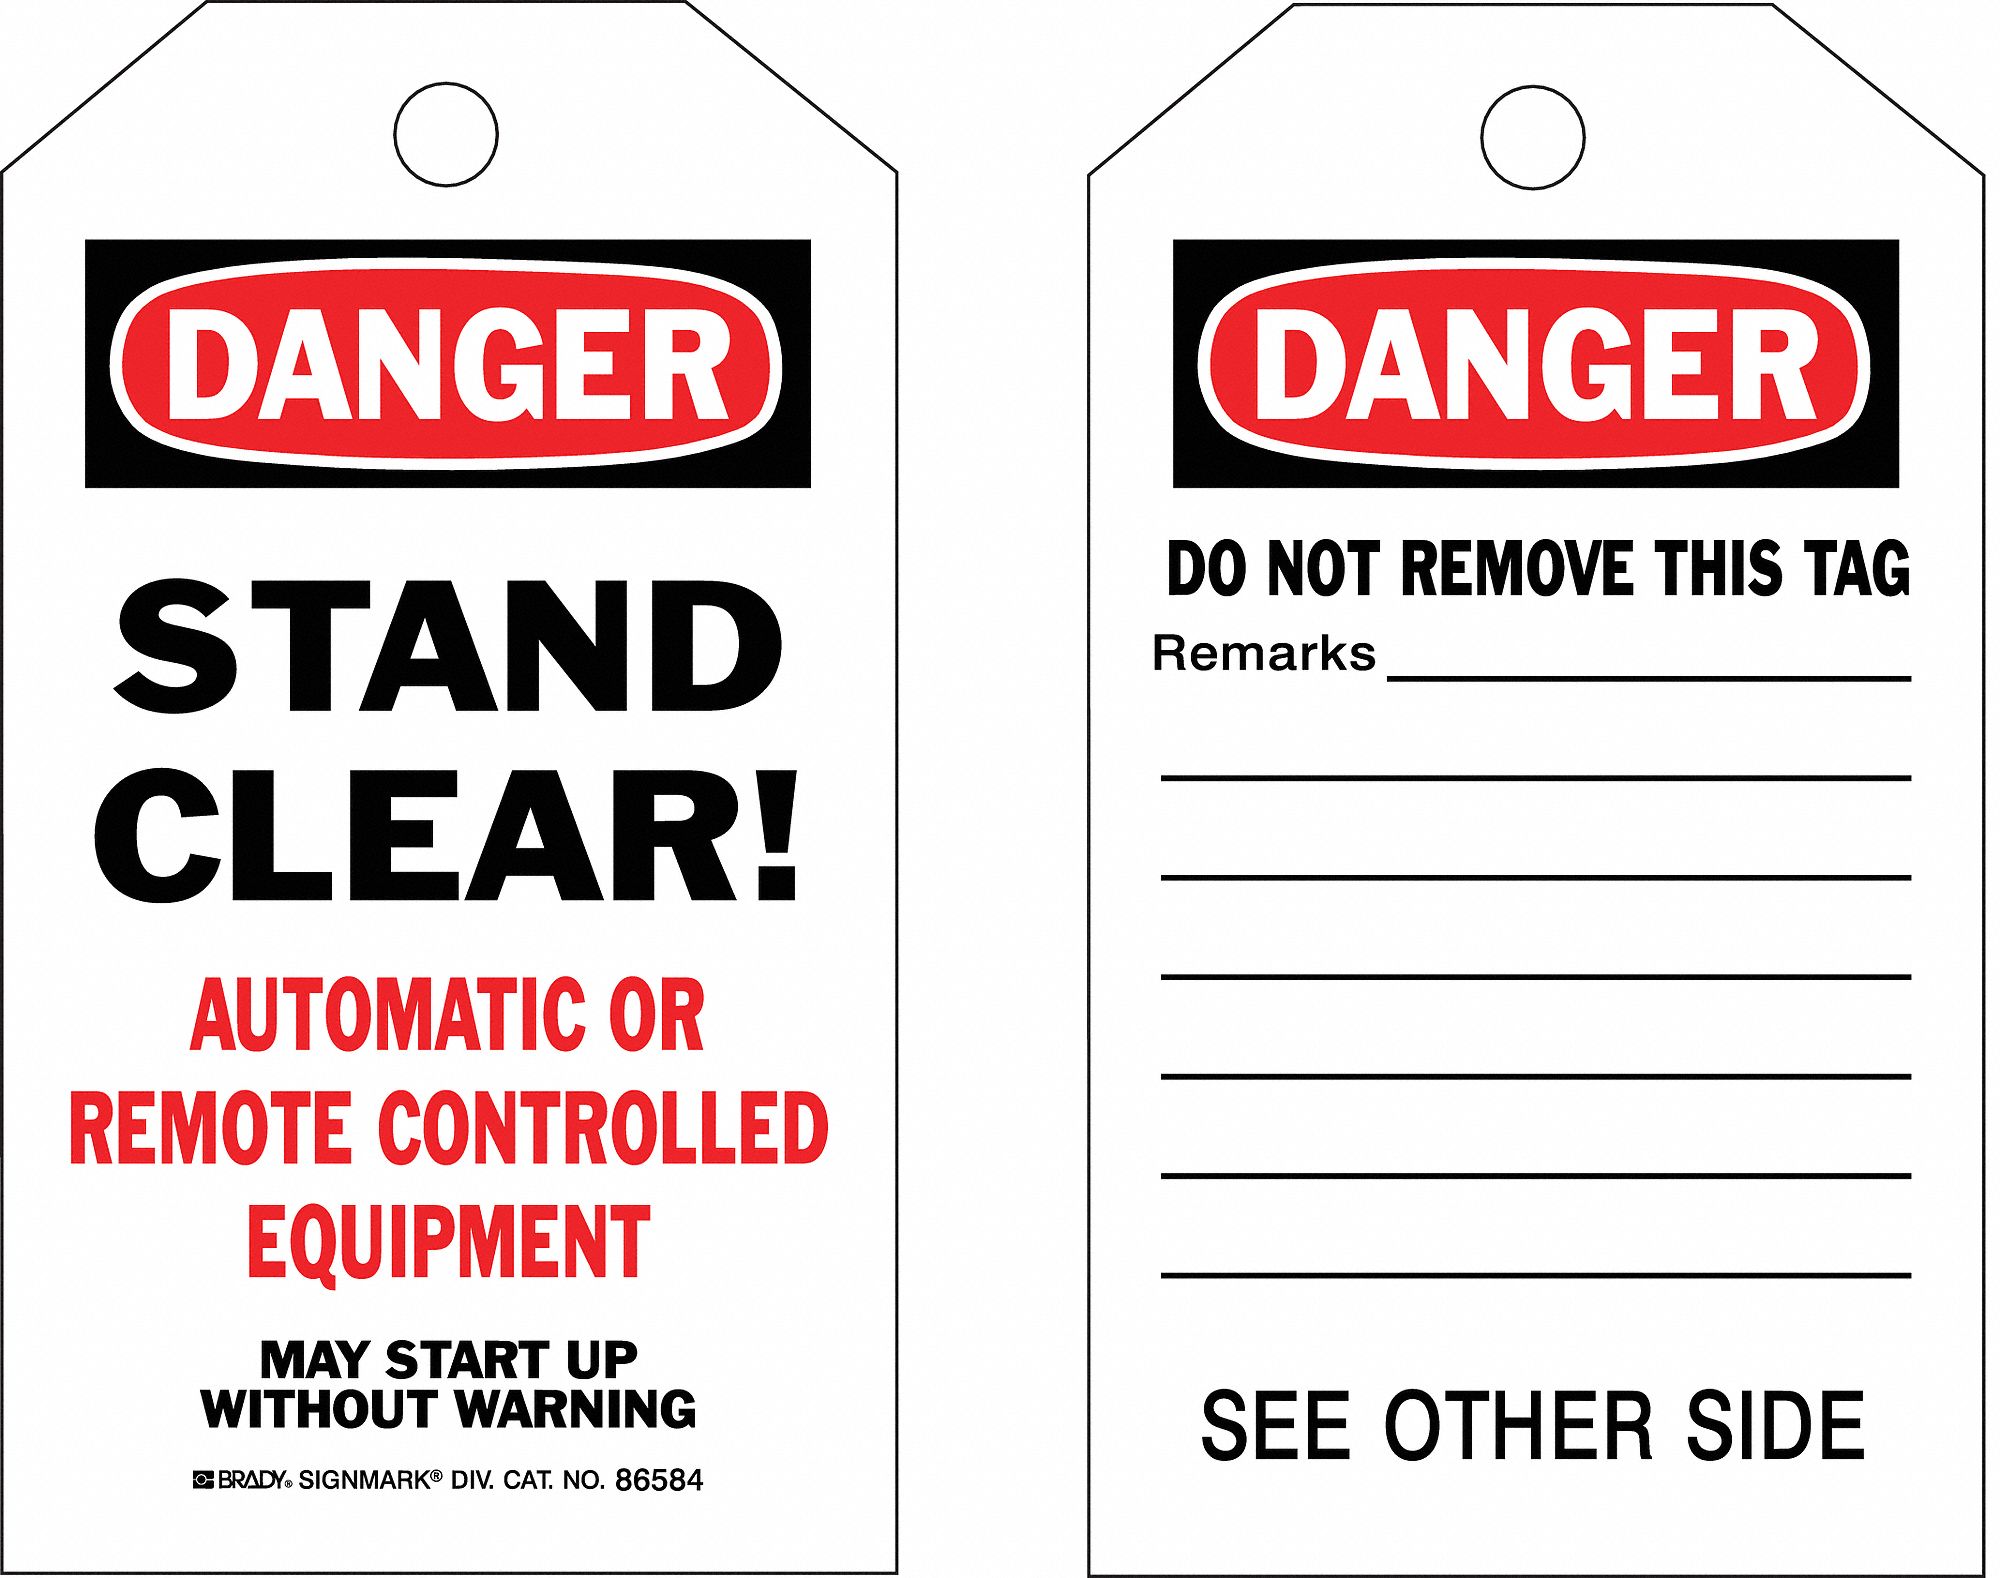 Economy PolyesterStand Clear! Automatic Or Remote Controlled Equipment, Danger Tag 7